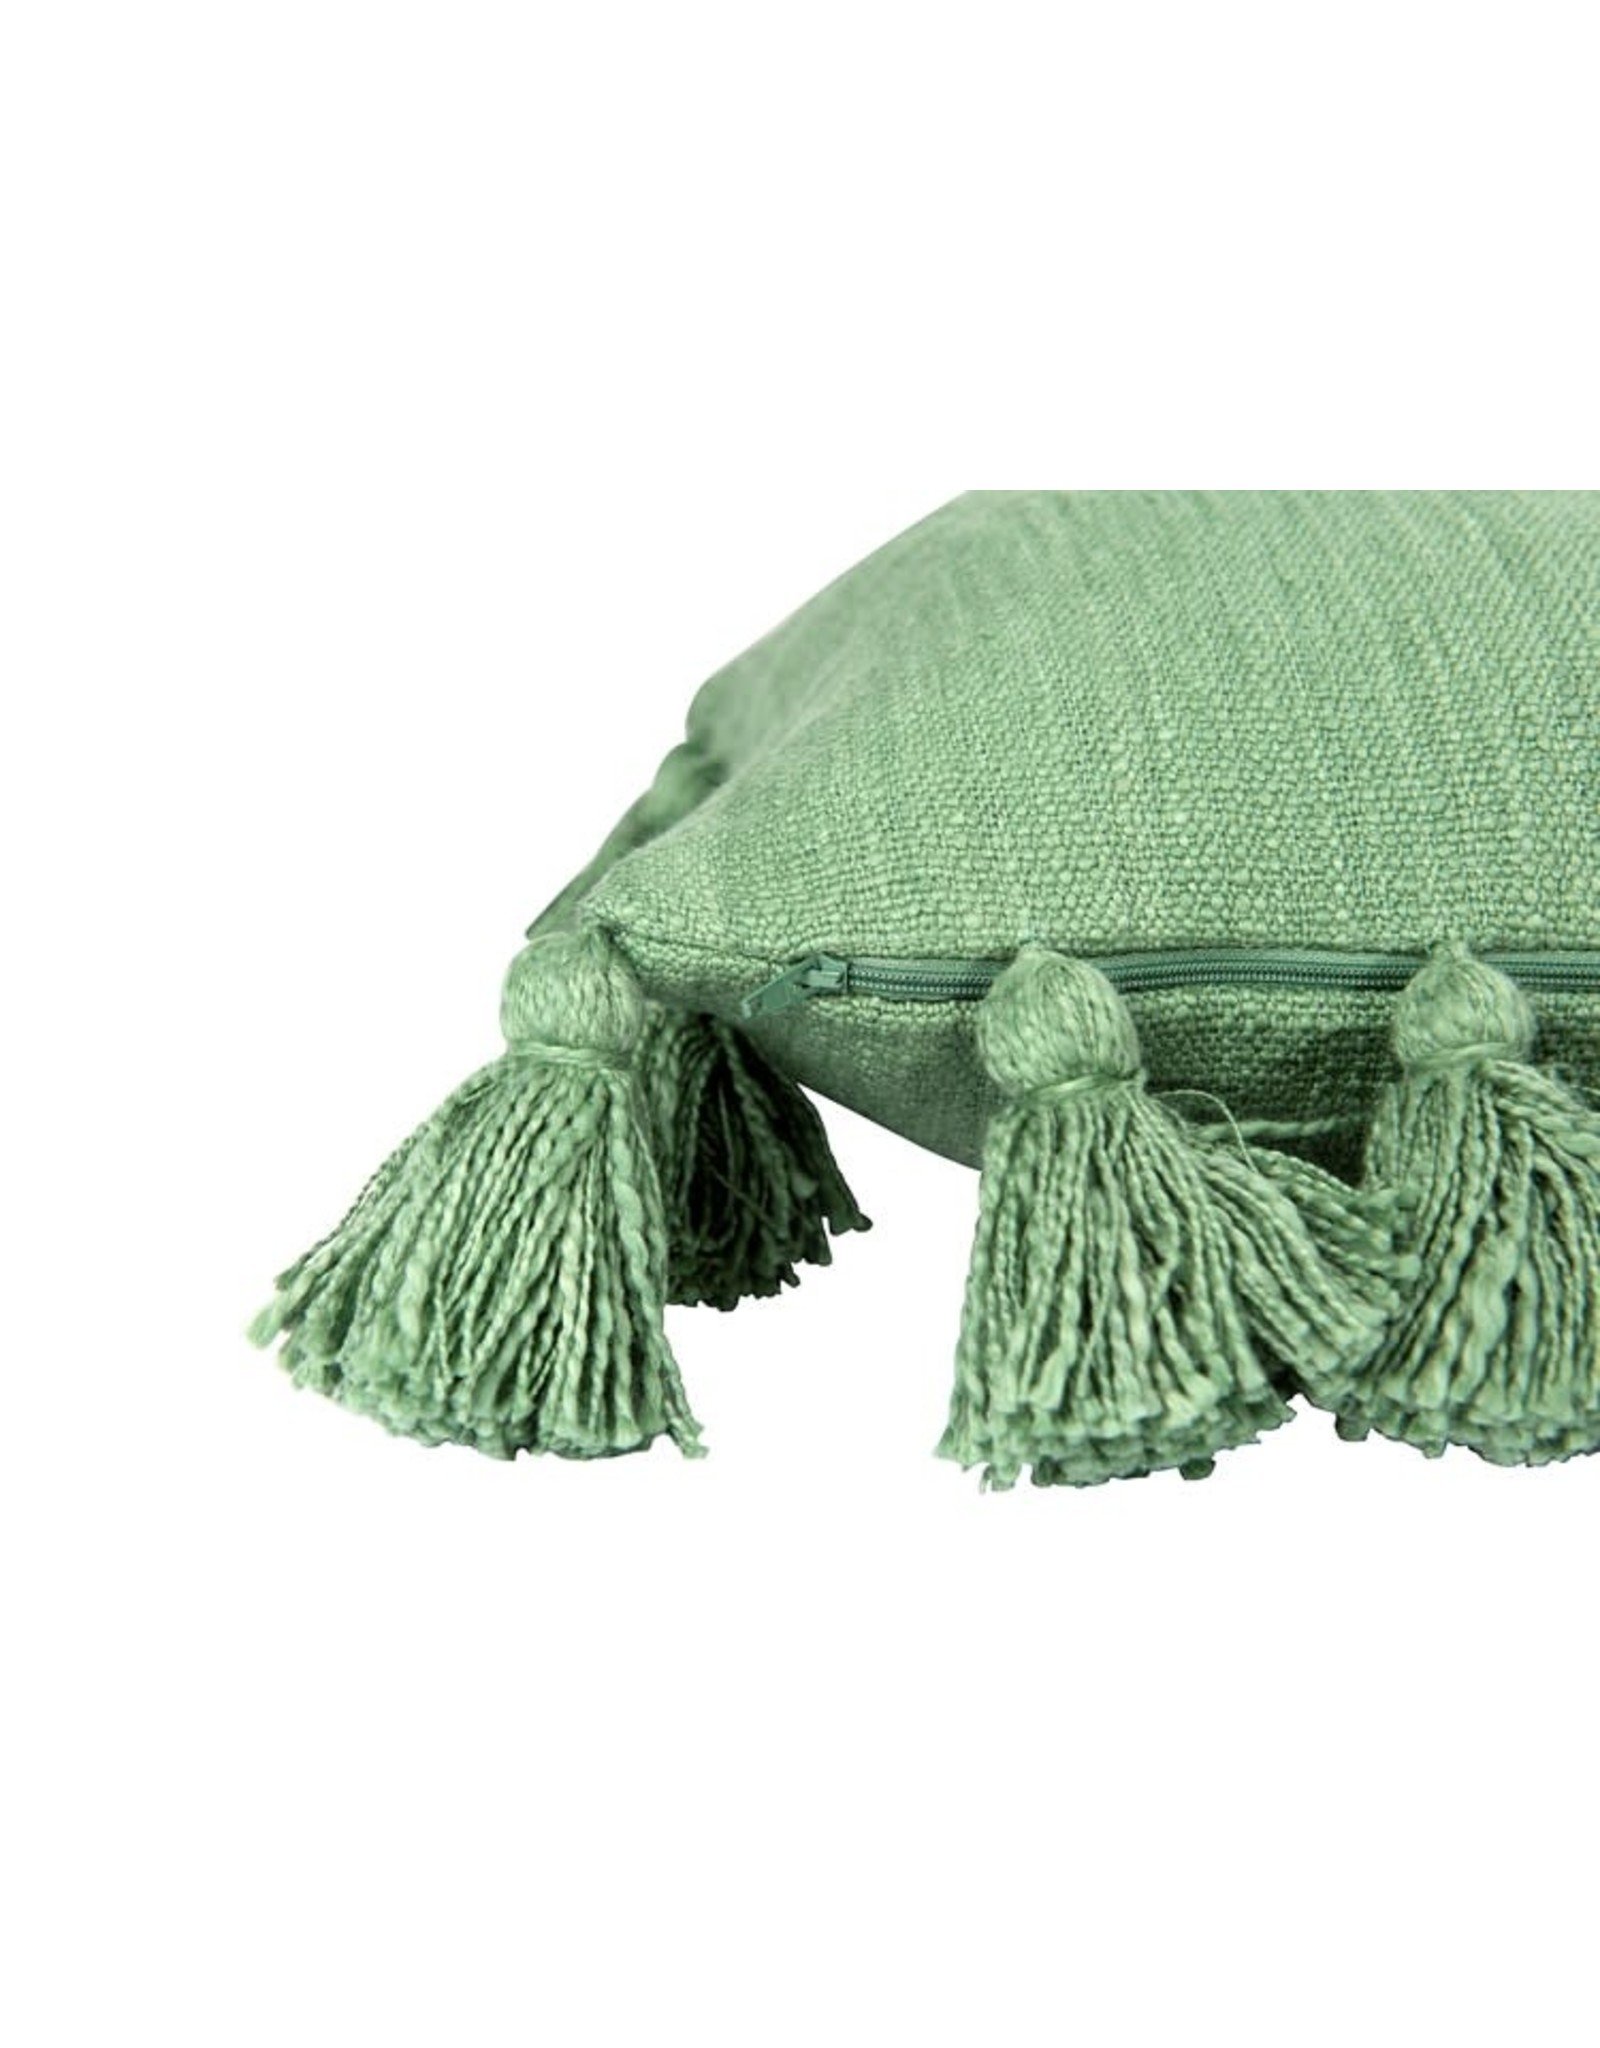 Creative Co-op 18” Square Cotton Pillow w/tassels - green